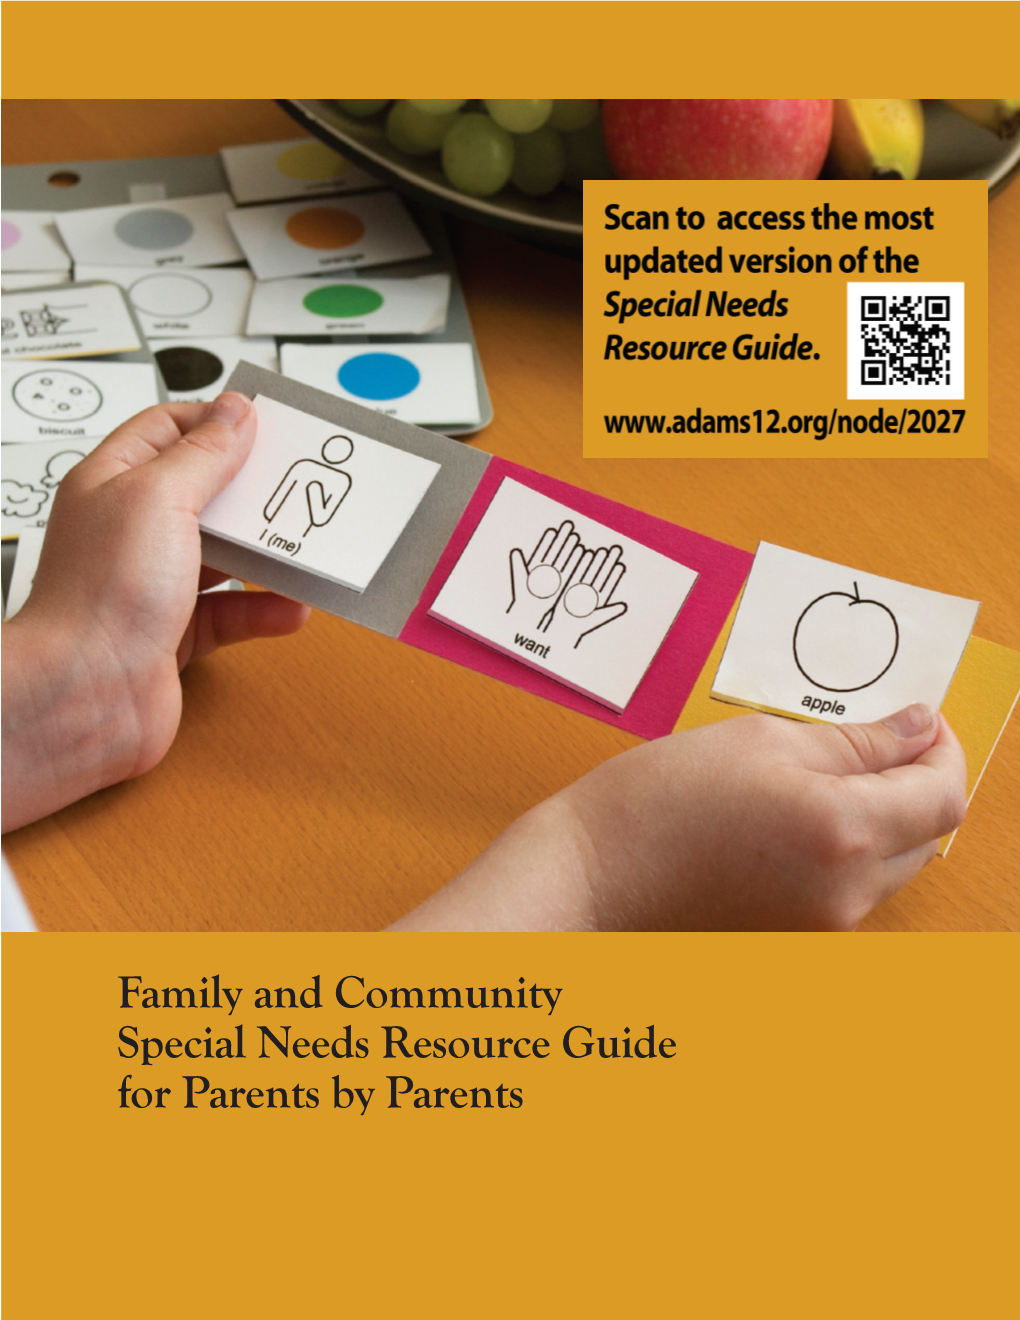 Family and Community Special Needs Resource Guide for Parents